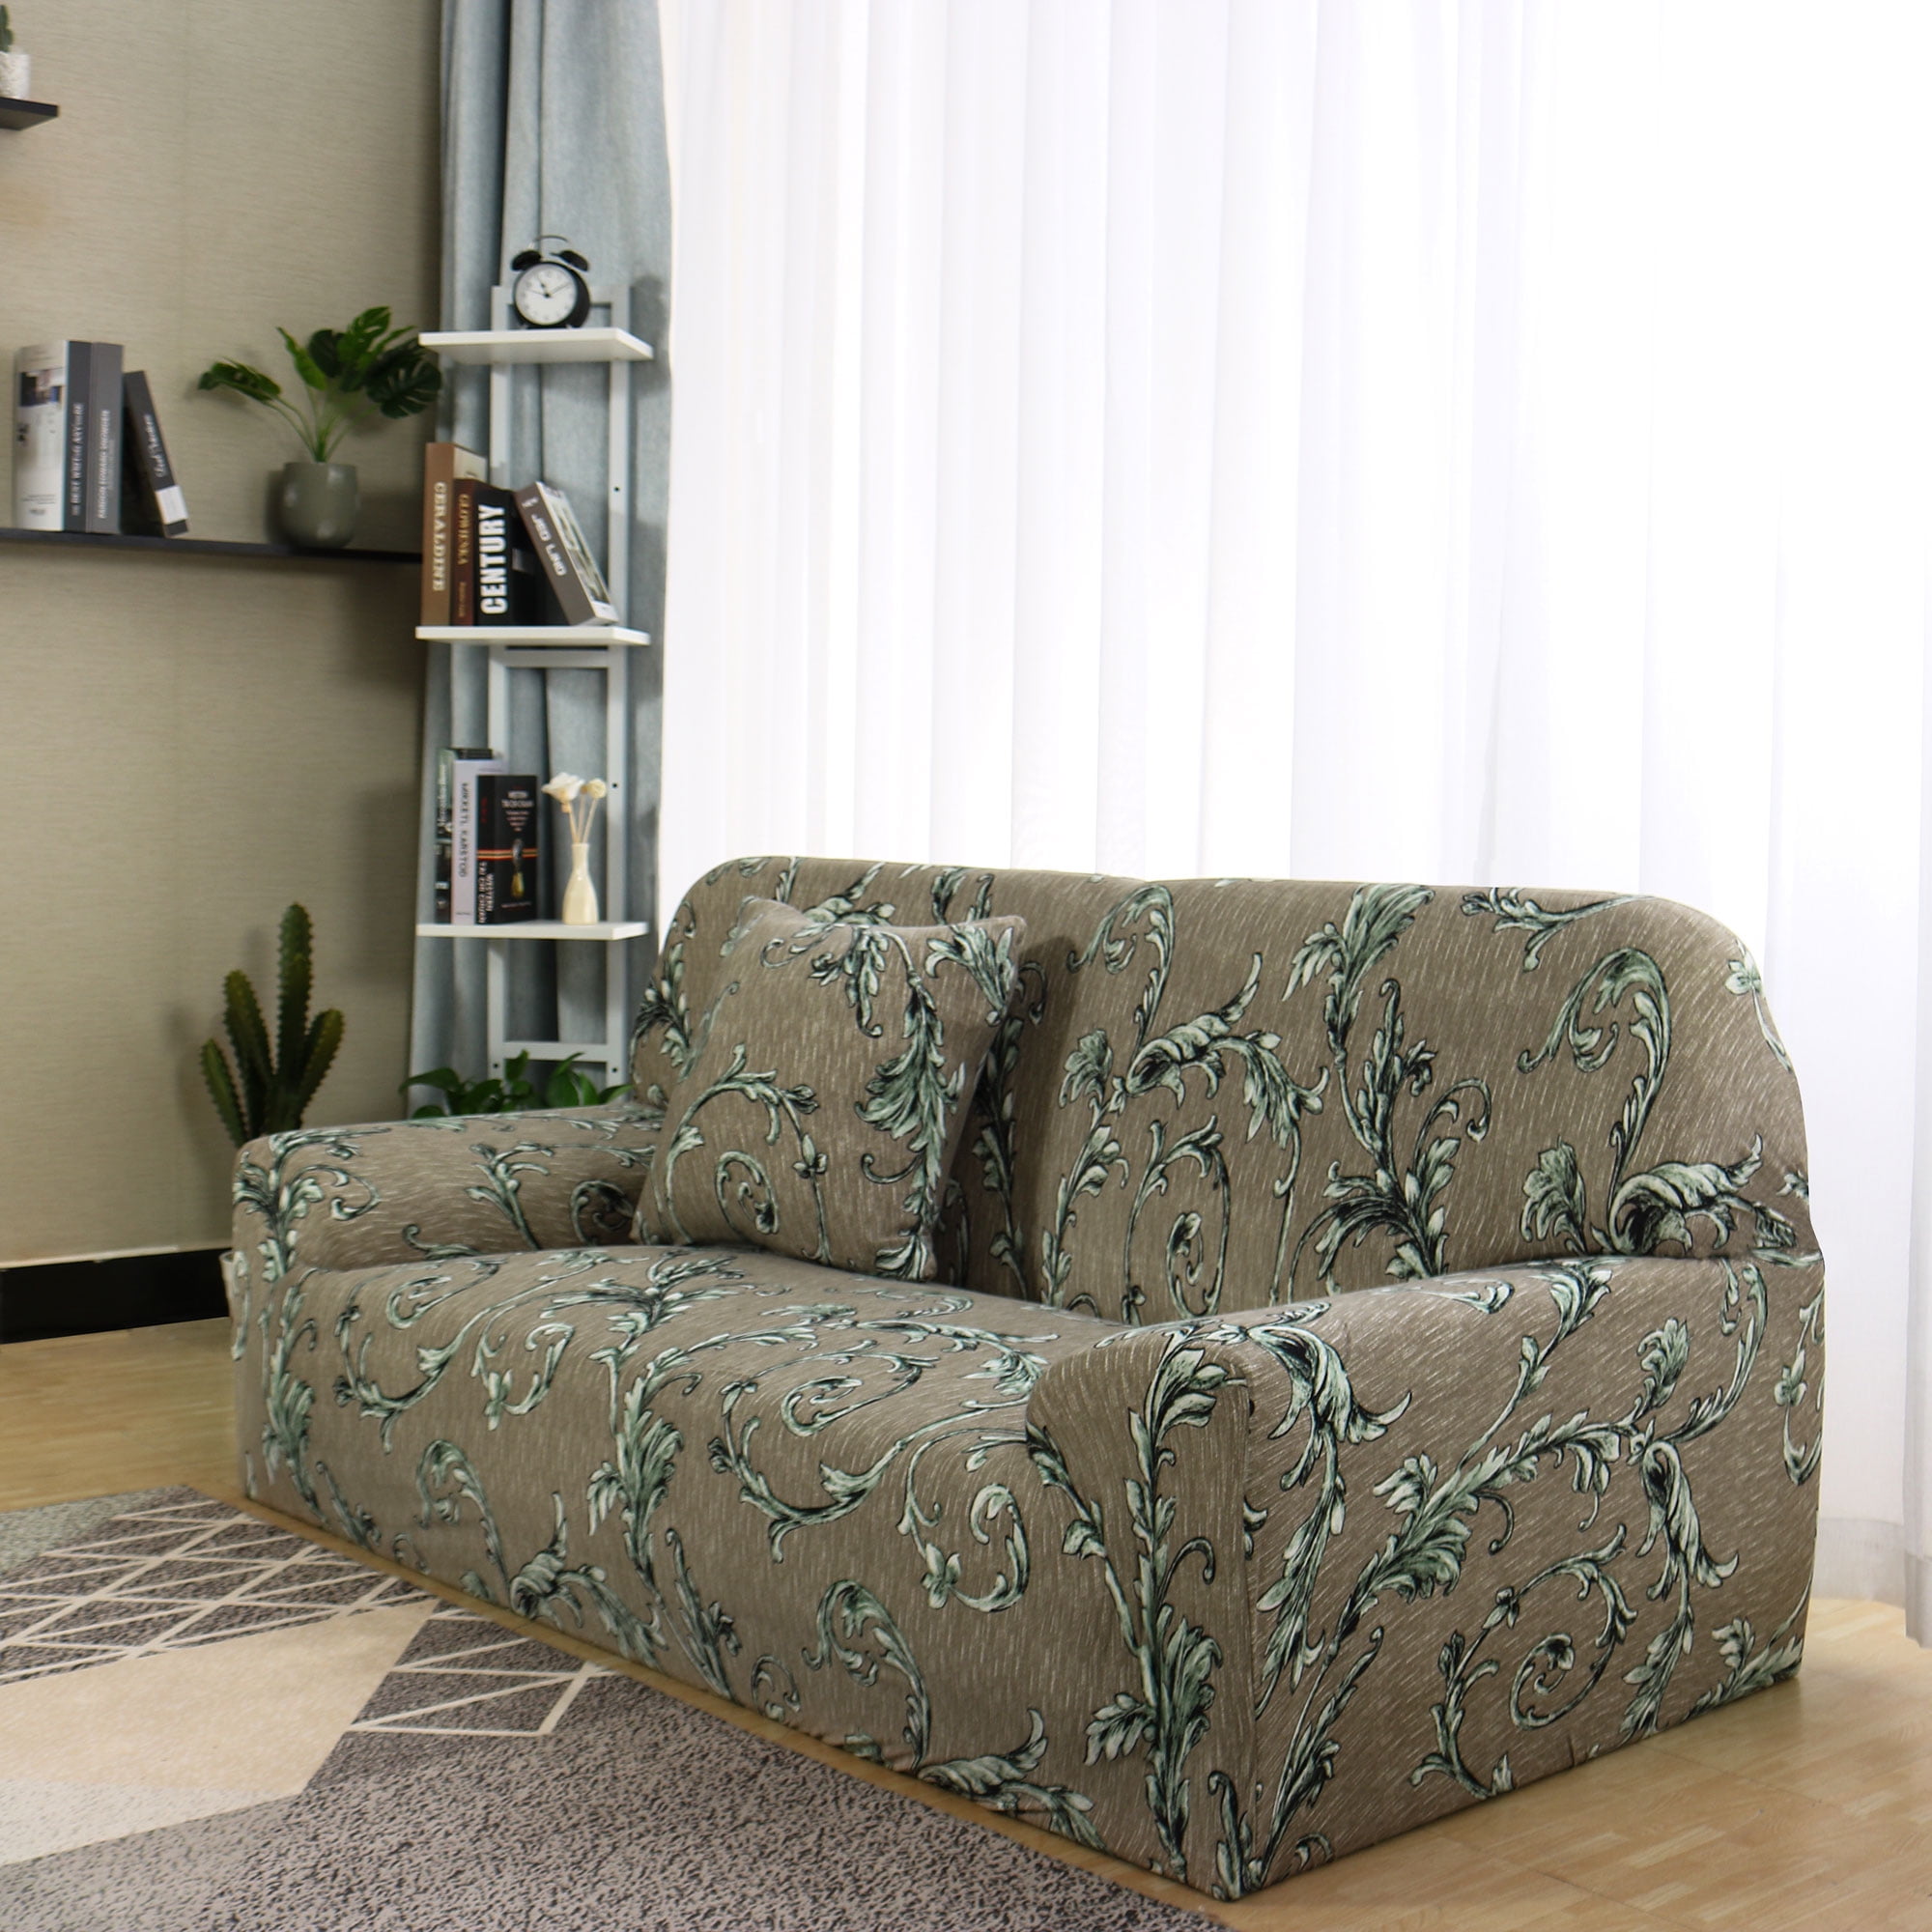 Details about   Forest Green Floral Tree Branch Pattern Sofa Couch Cover Slipcover 